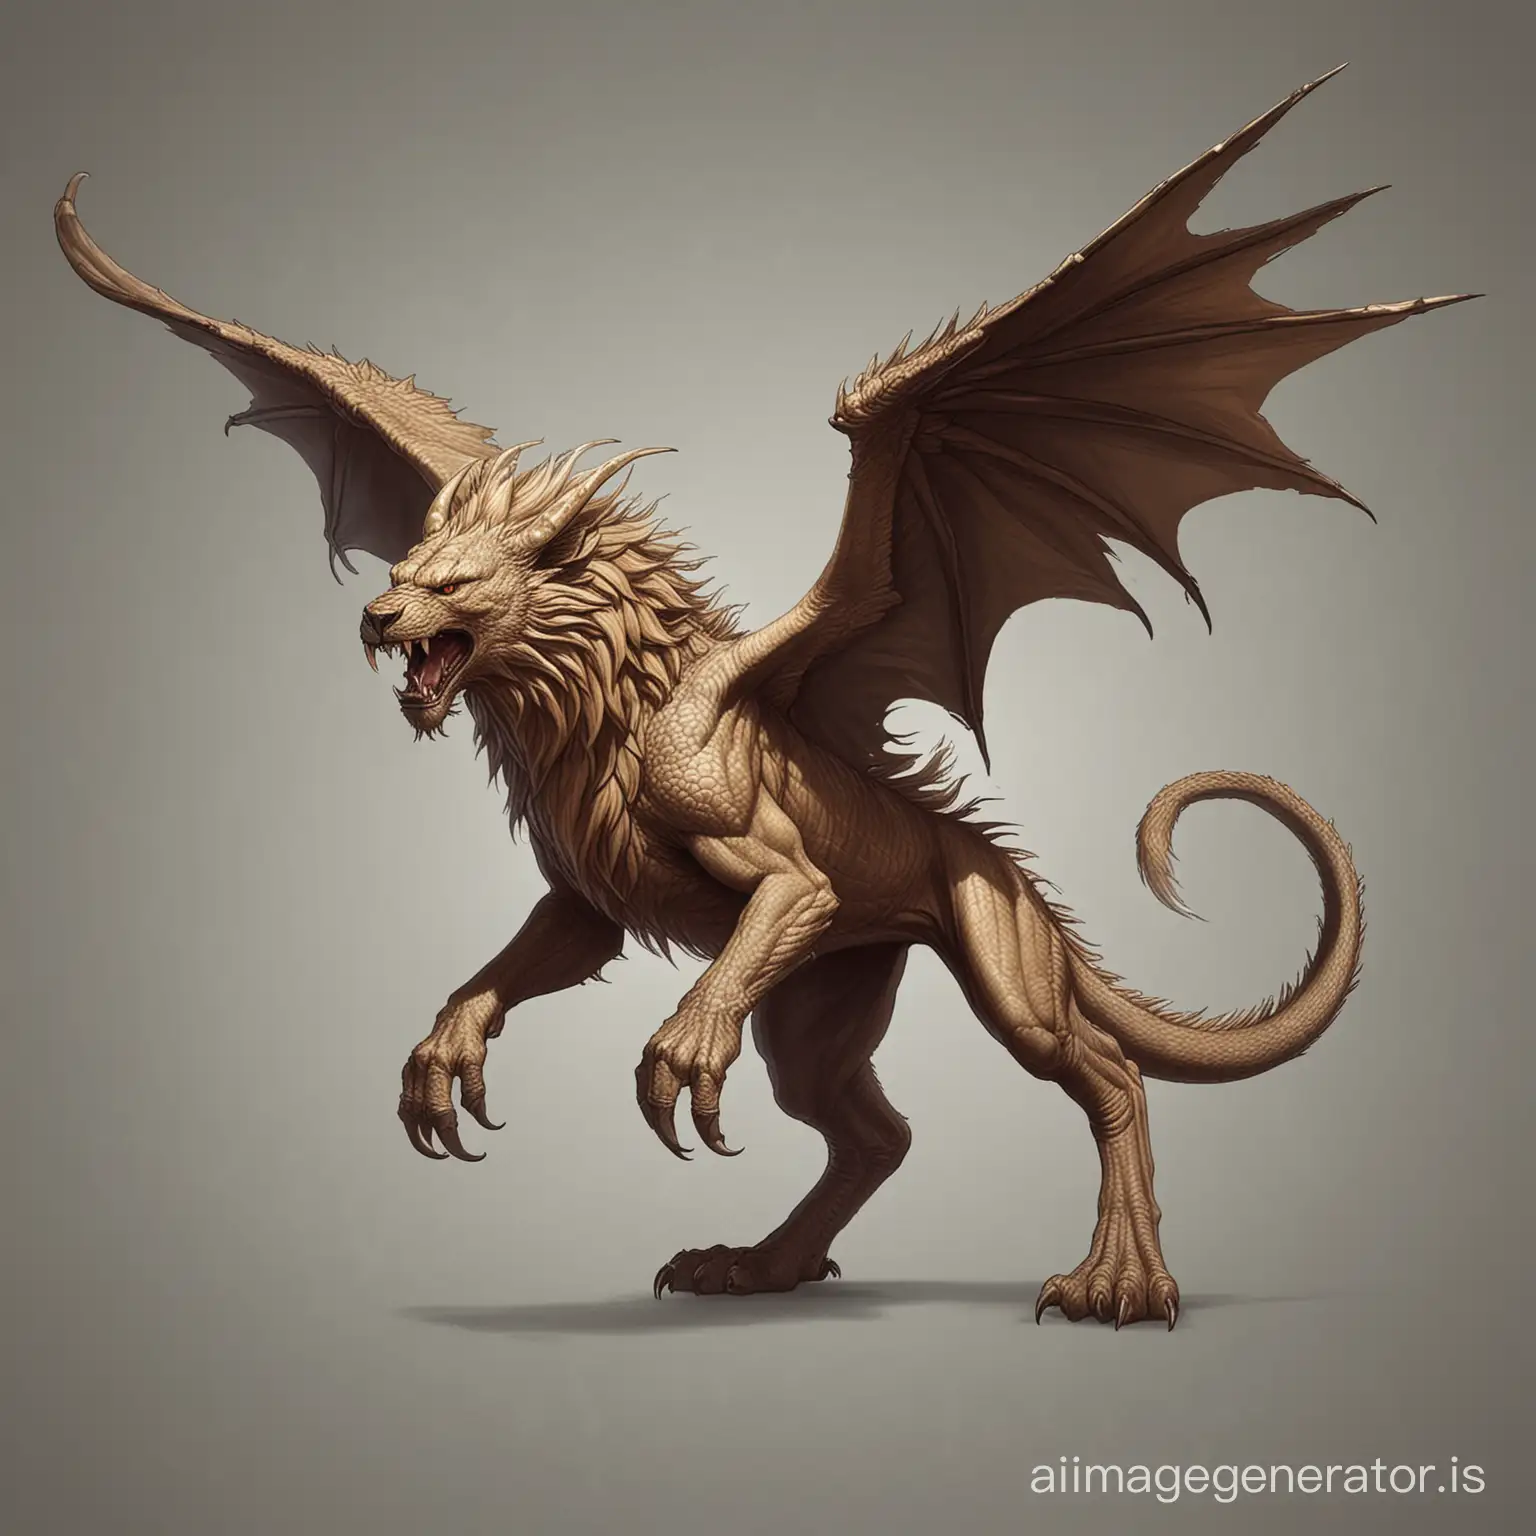 Mythical-Hybrid-Beast-LionHeaded-Dragon-with-Bear-Front-Legs-and-Scorpion-Tail